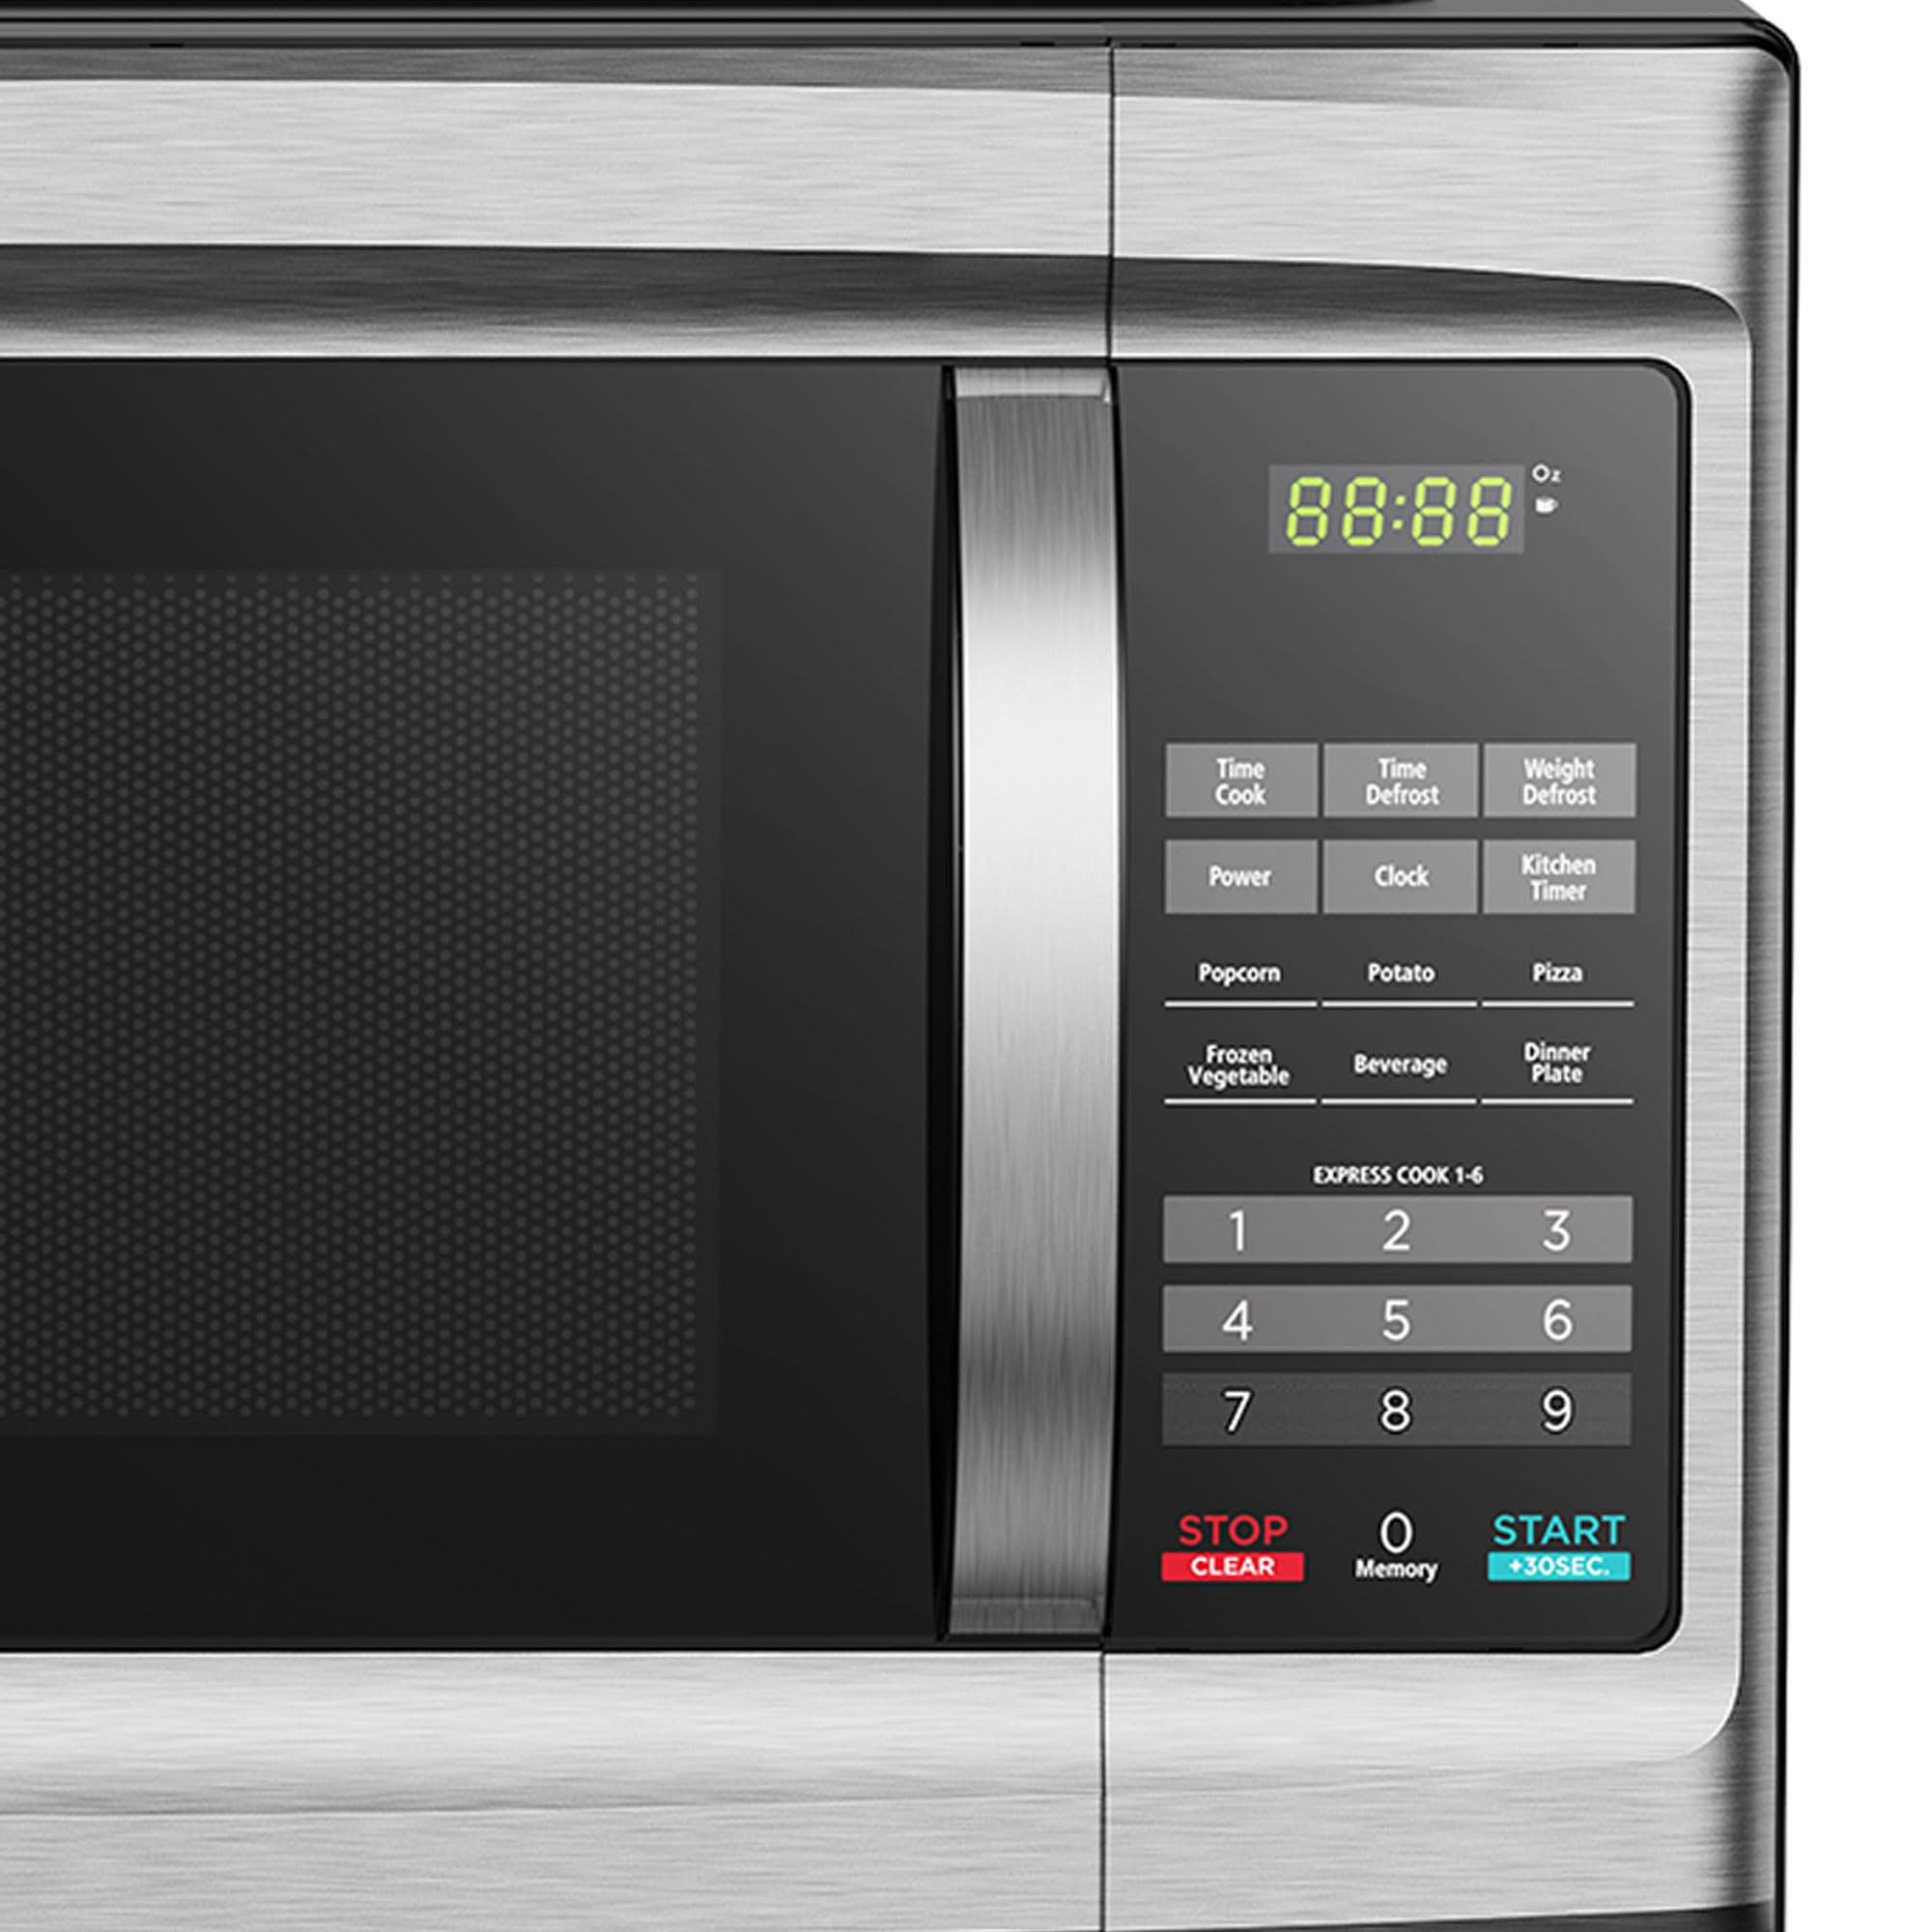 Black+Decker 1000 Watt Stainless Steel Small Microwave Countertop Oven with 6 Cooking Modes, Digital Touch Controls, and Display, Black